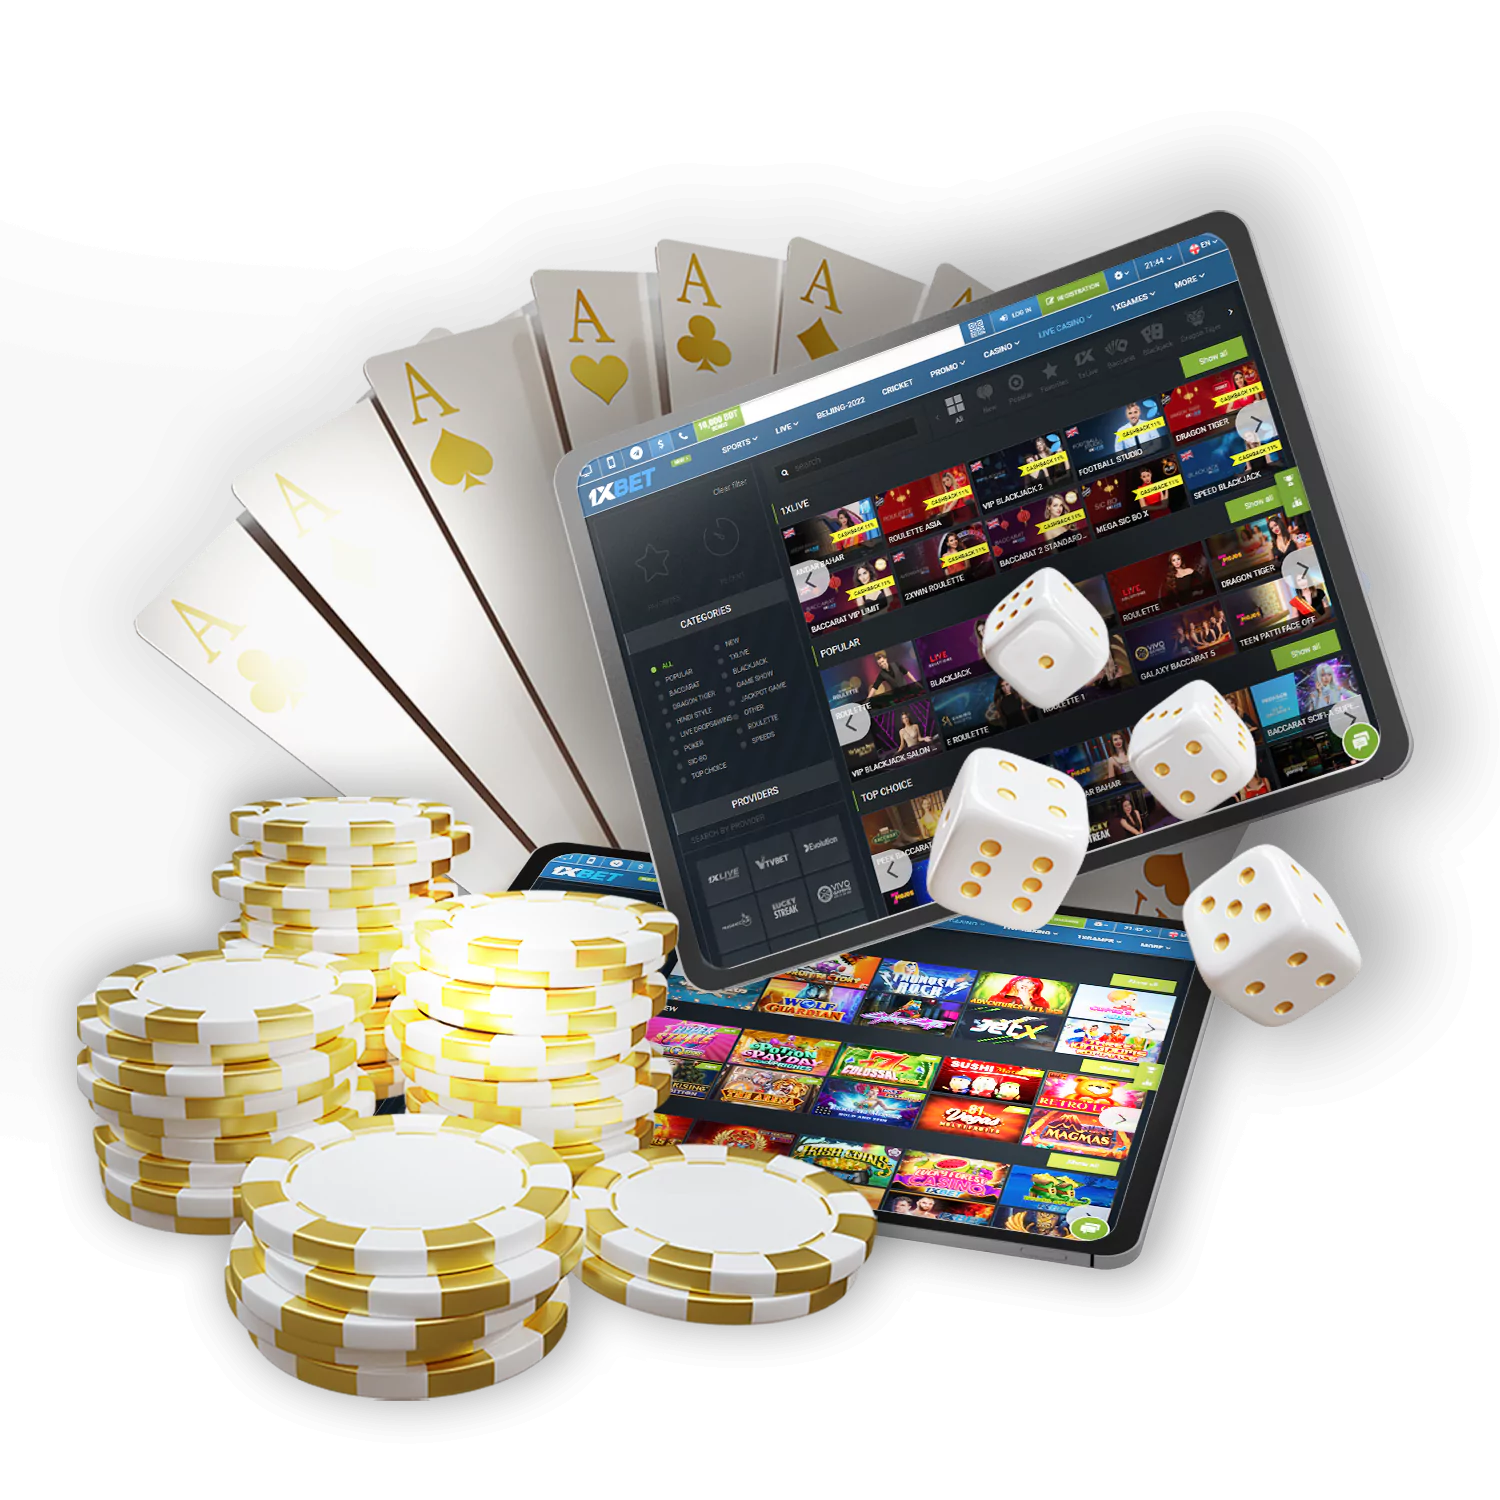 Learn how to play casino games and slots at 1xBet Bangladesh.